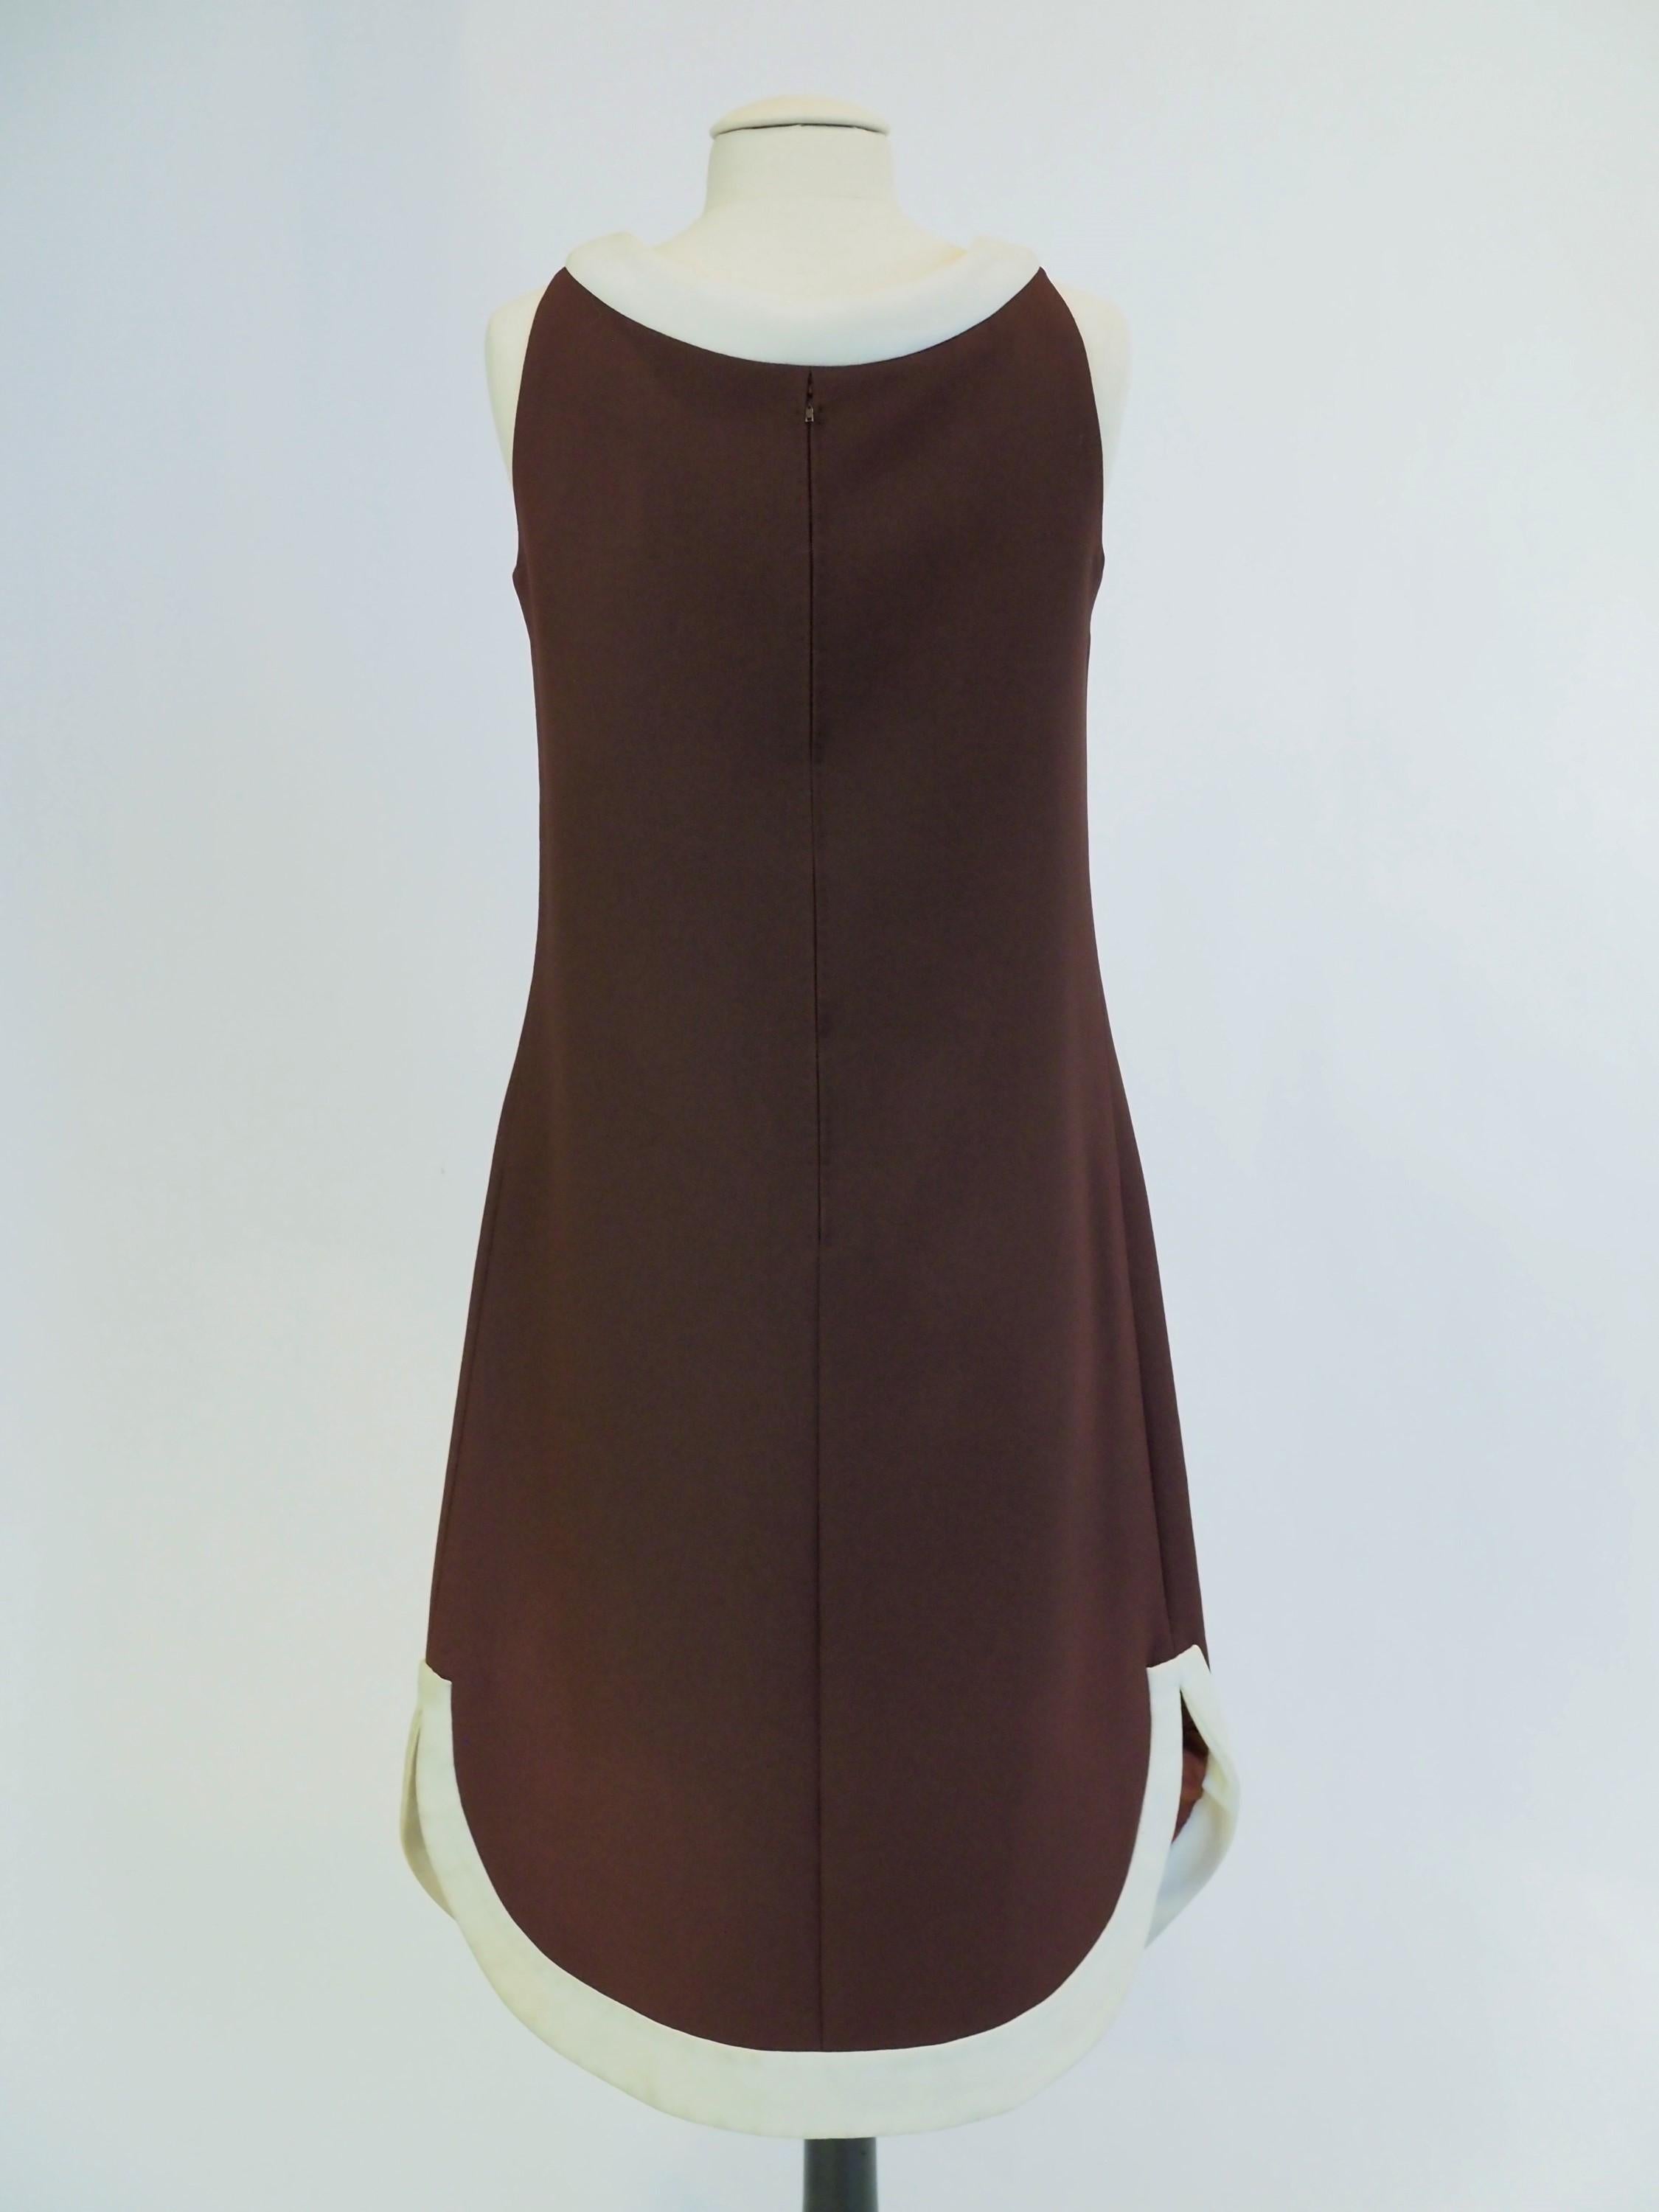 A Space Age Pierre Cardin Dress in chocolate jersey Circa 1970/1975 For Sale 9